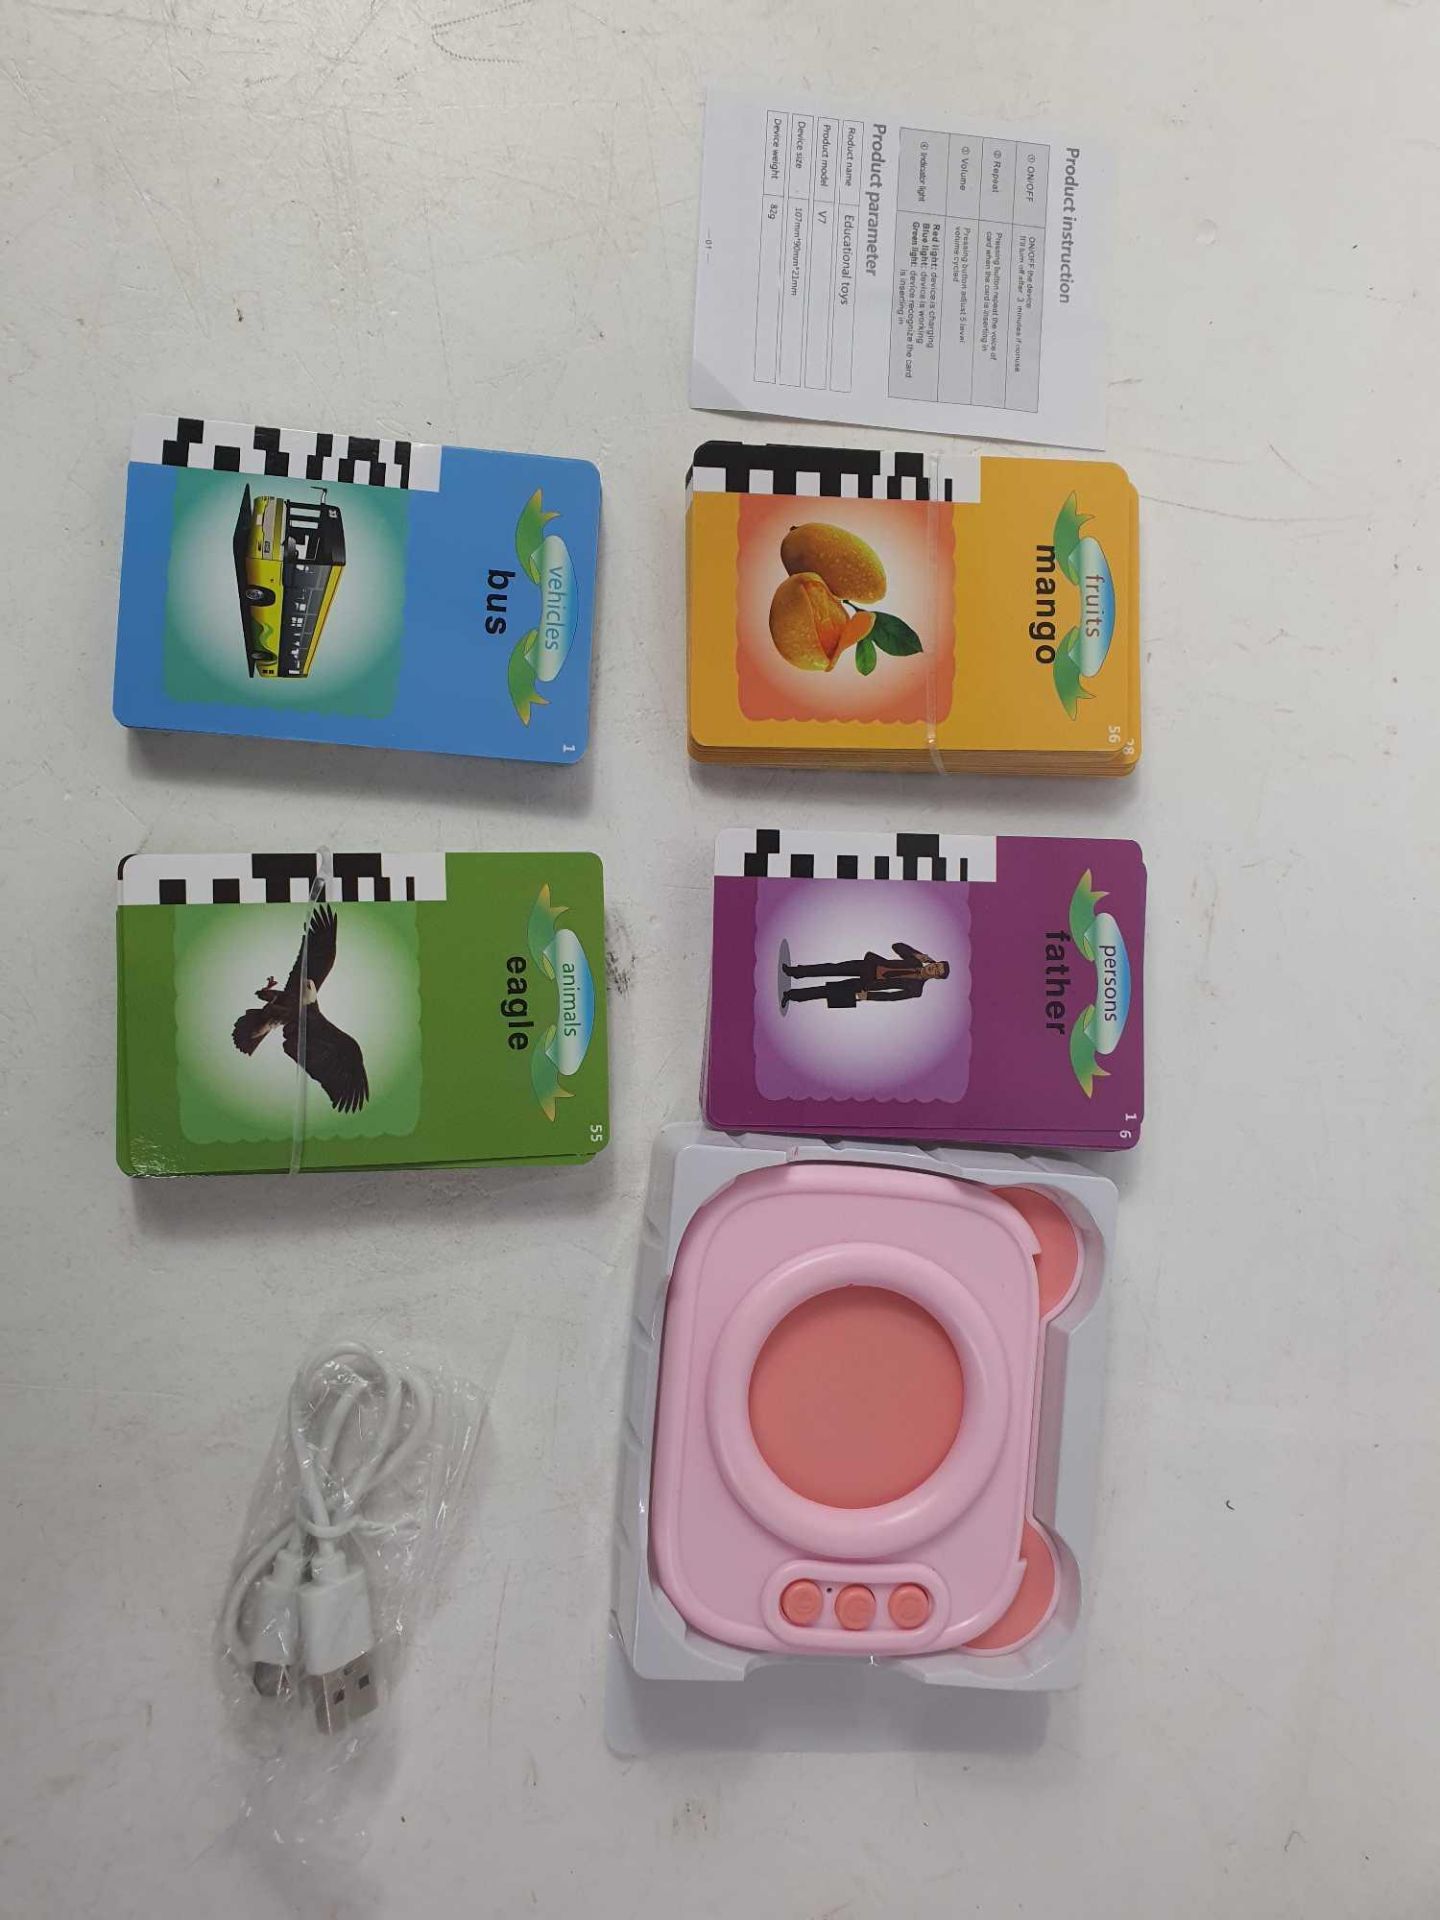 PRESCHOOL LEARNING DEVICE WITH CARDS AND CARD READER